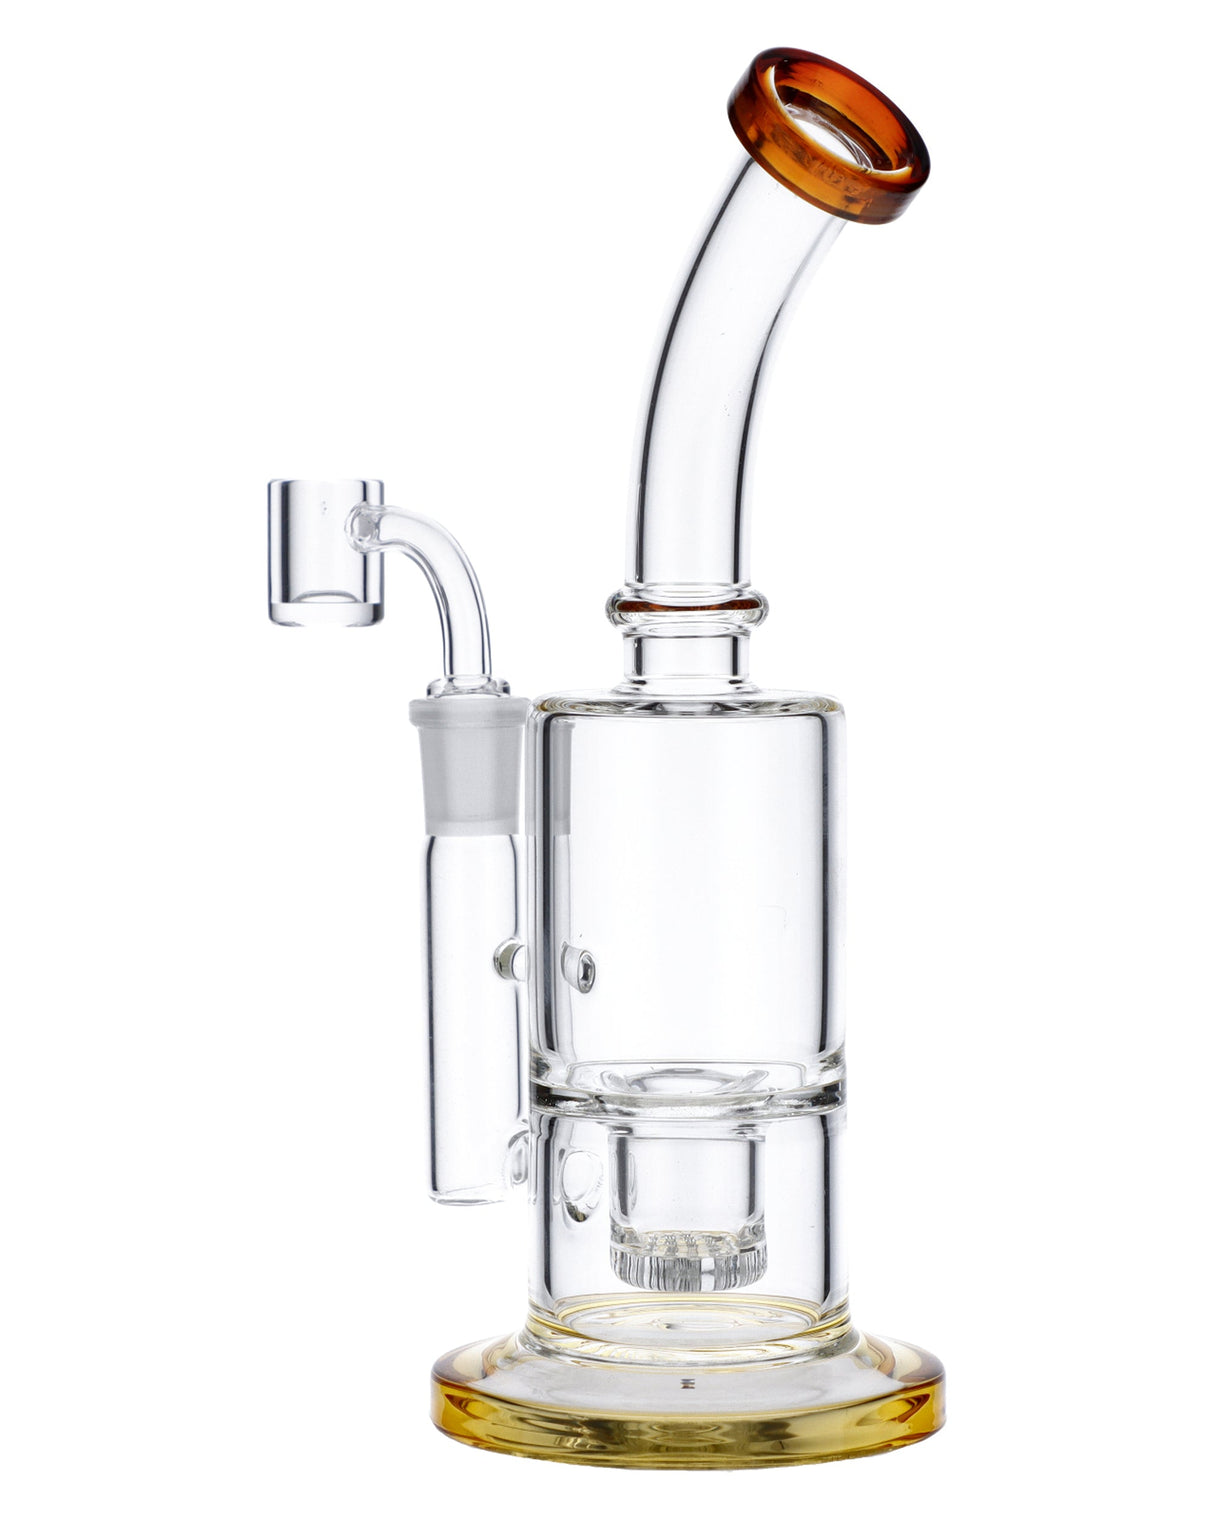 Yellow Valiant Bubbler Rig, 8 inch, with Borosilicate Glass and Bubble Design, Front View